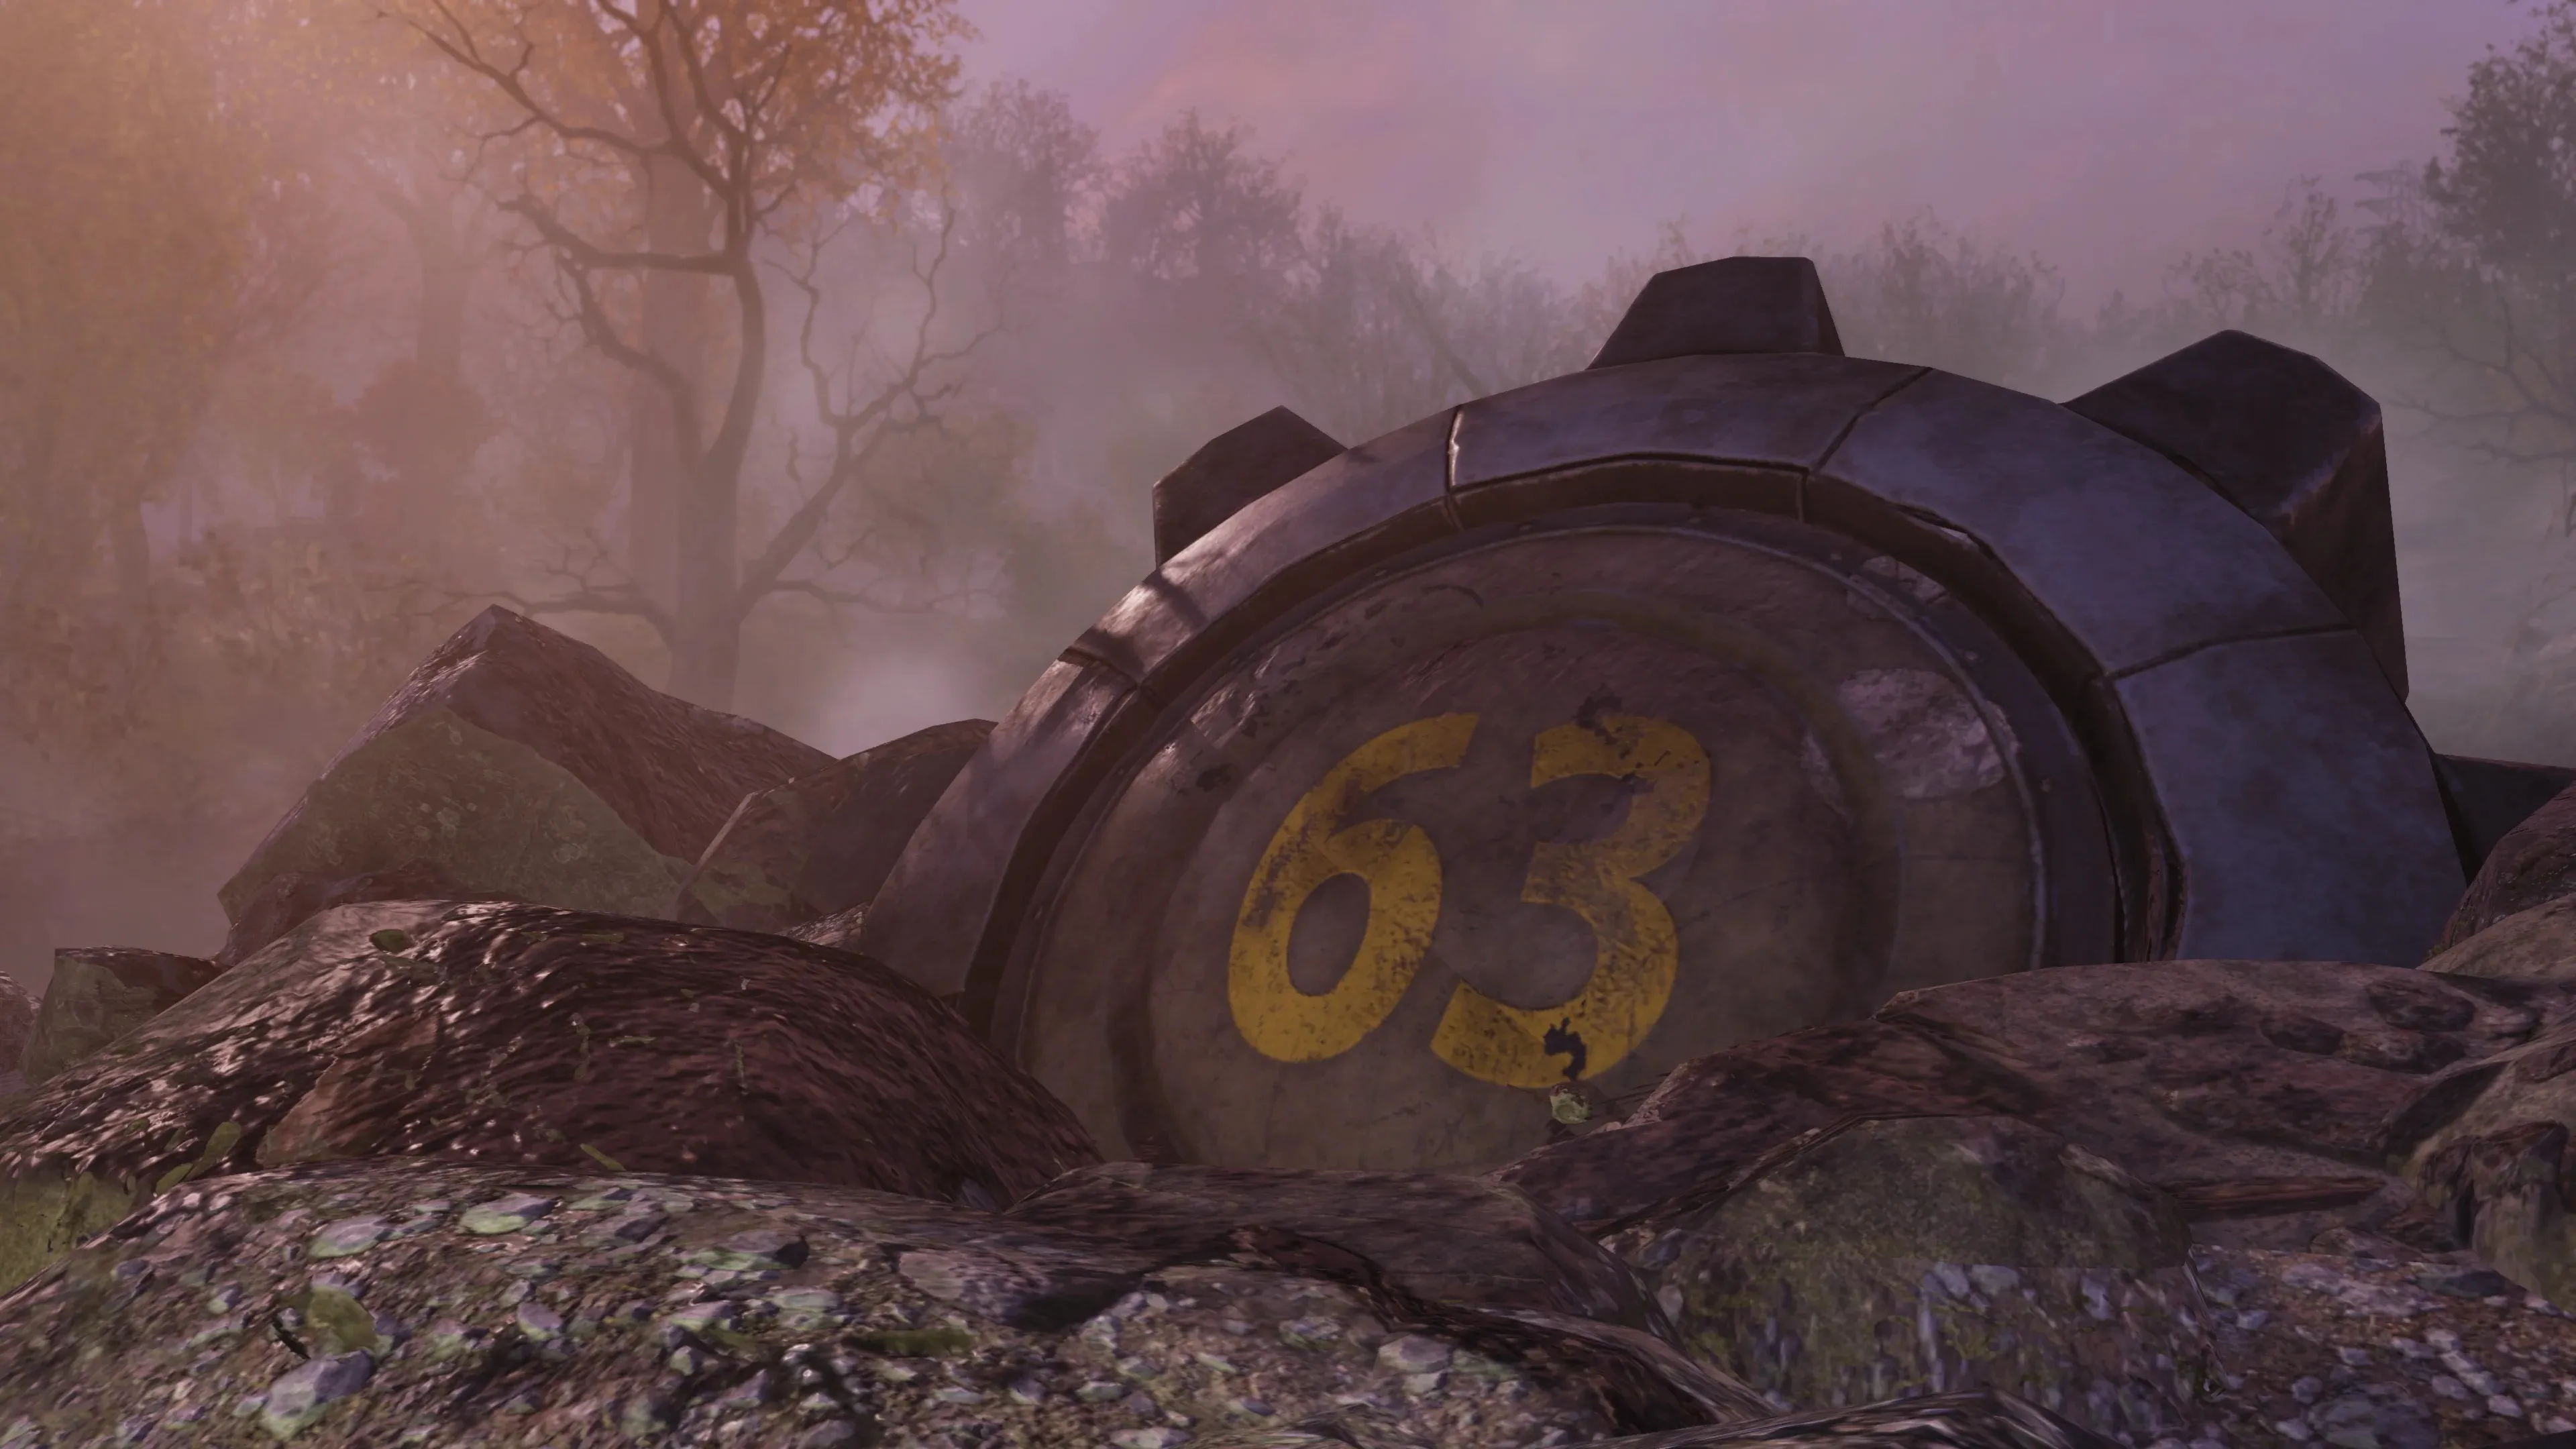 Vault 63 in Fallout 76